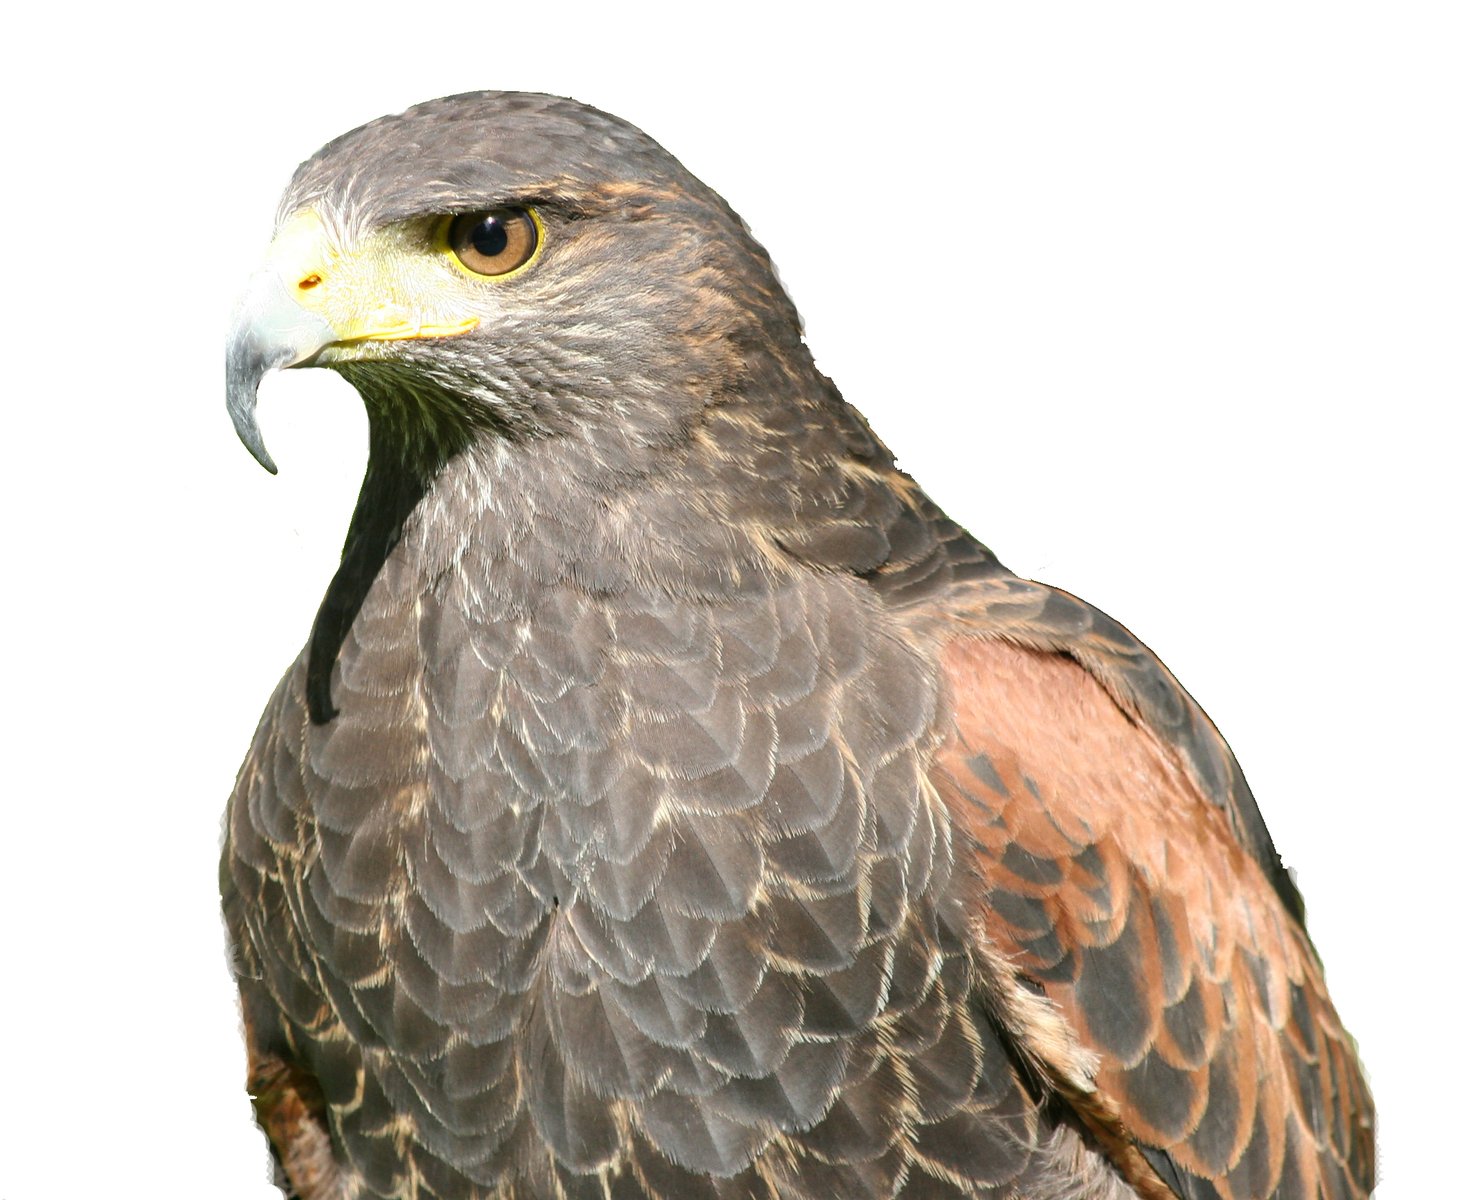 an eagle looking directly in the camera while standing on a perch